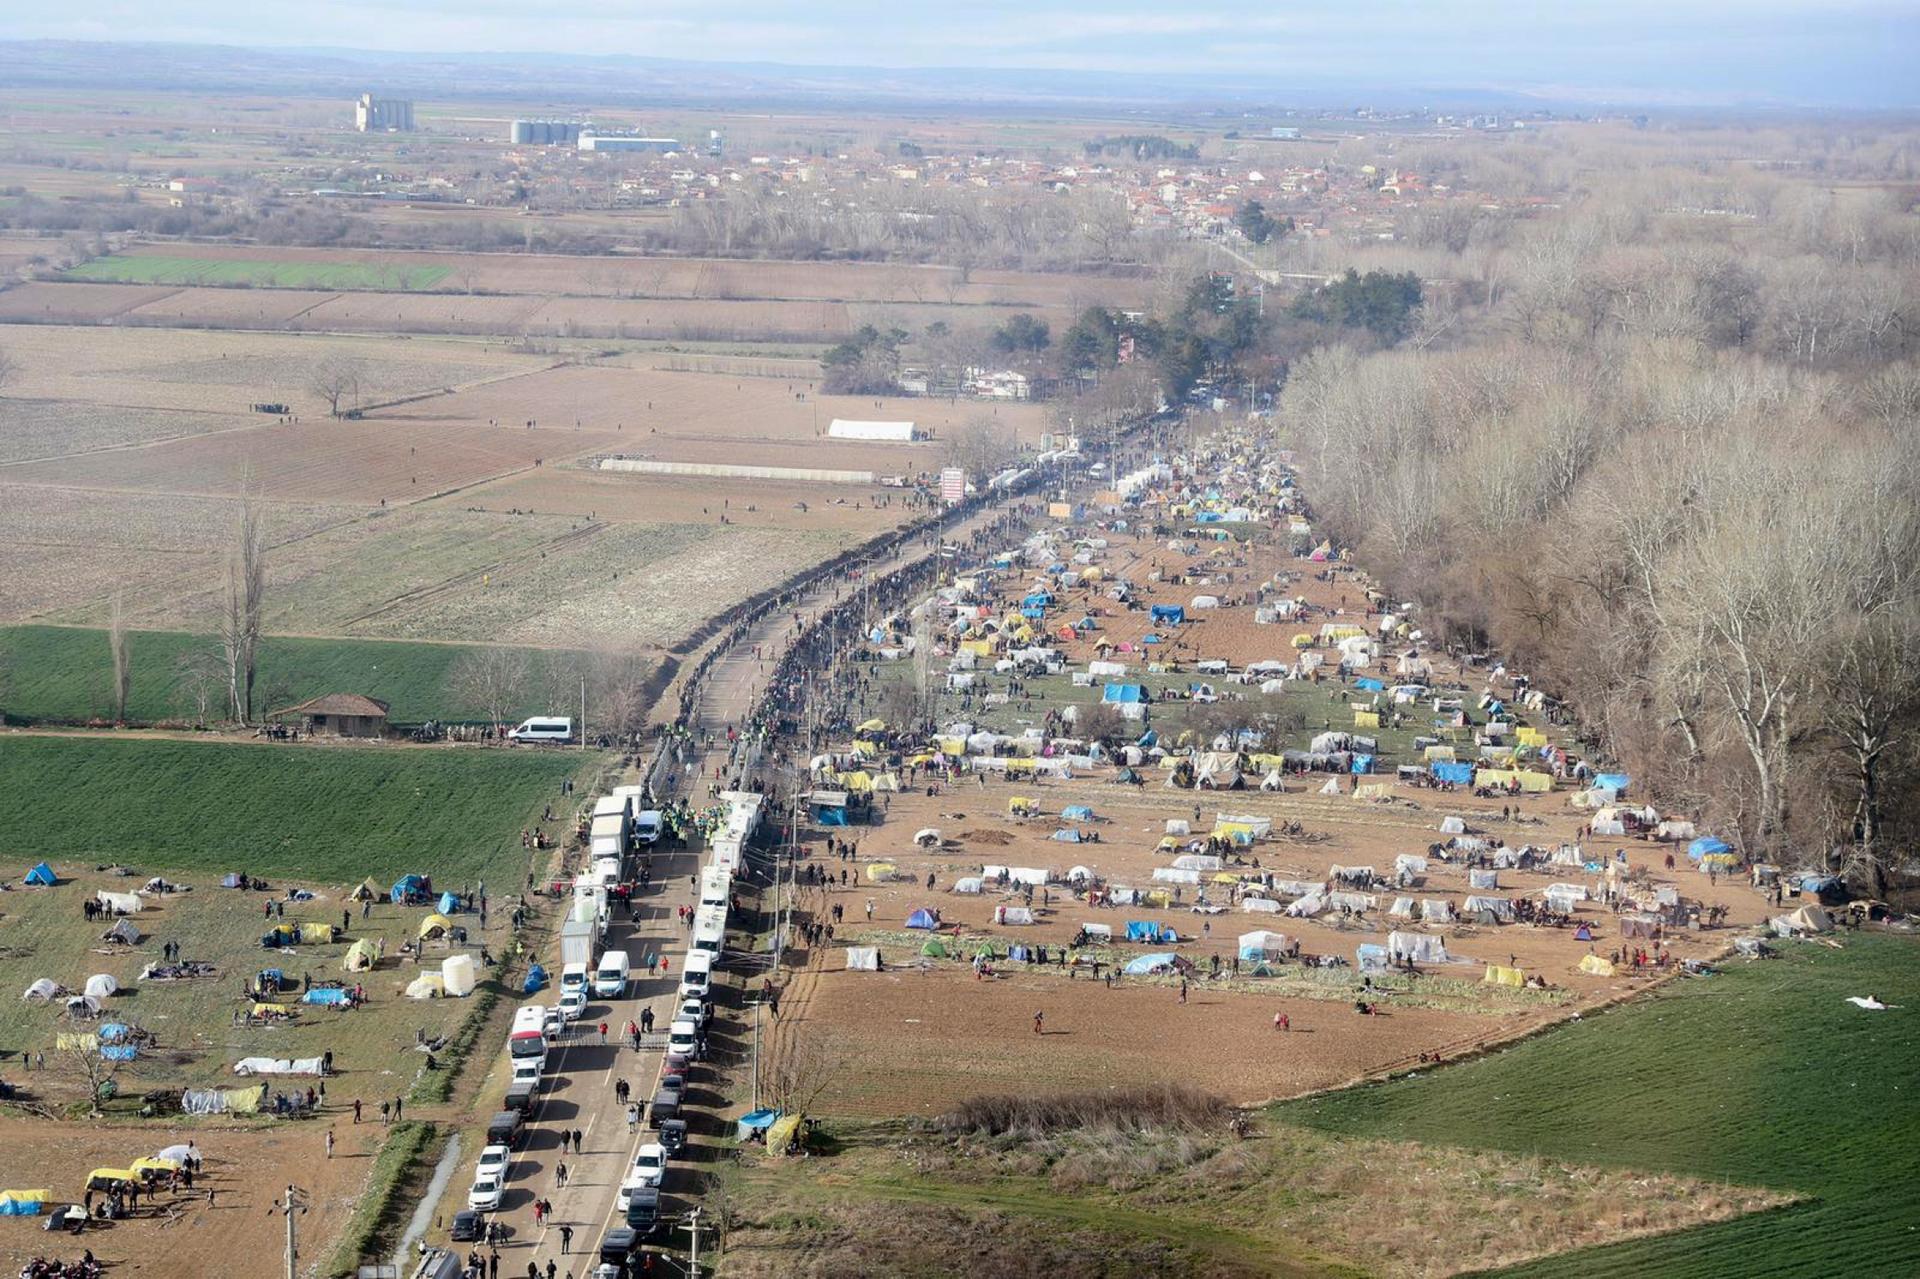 An aerial photo taken from the helicopter of Turkish Interior Minister Suleyman Soylu shows migrants waiting in line to receive food at Turkey's Pazarkule border crossing with Greece's Kastanies, near Edirne in Turkey, on March 5, 2020.